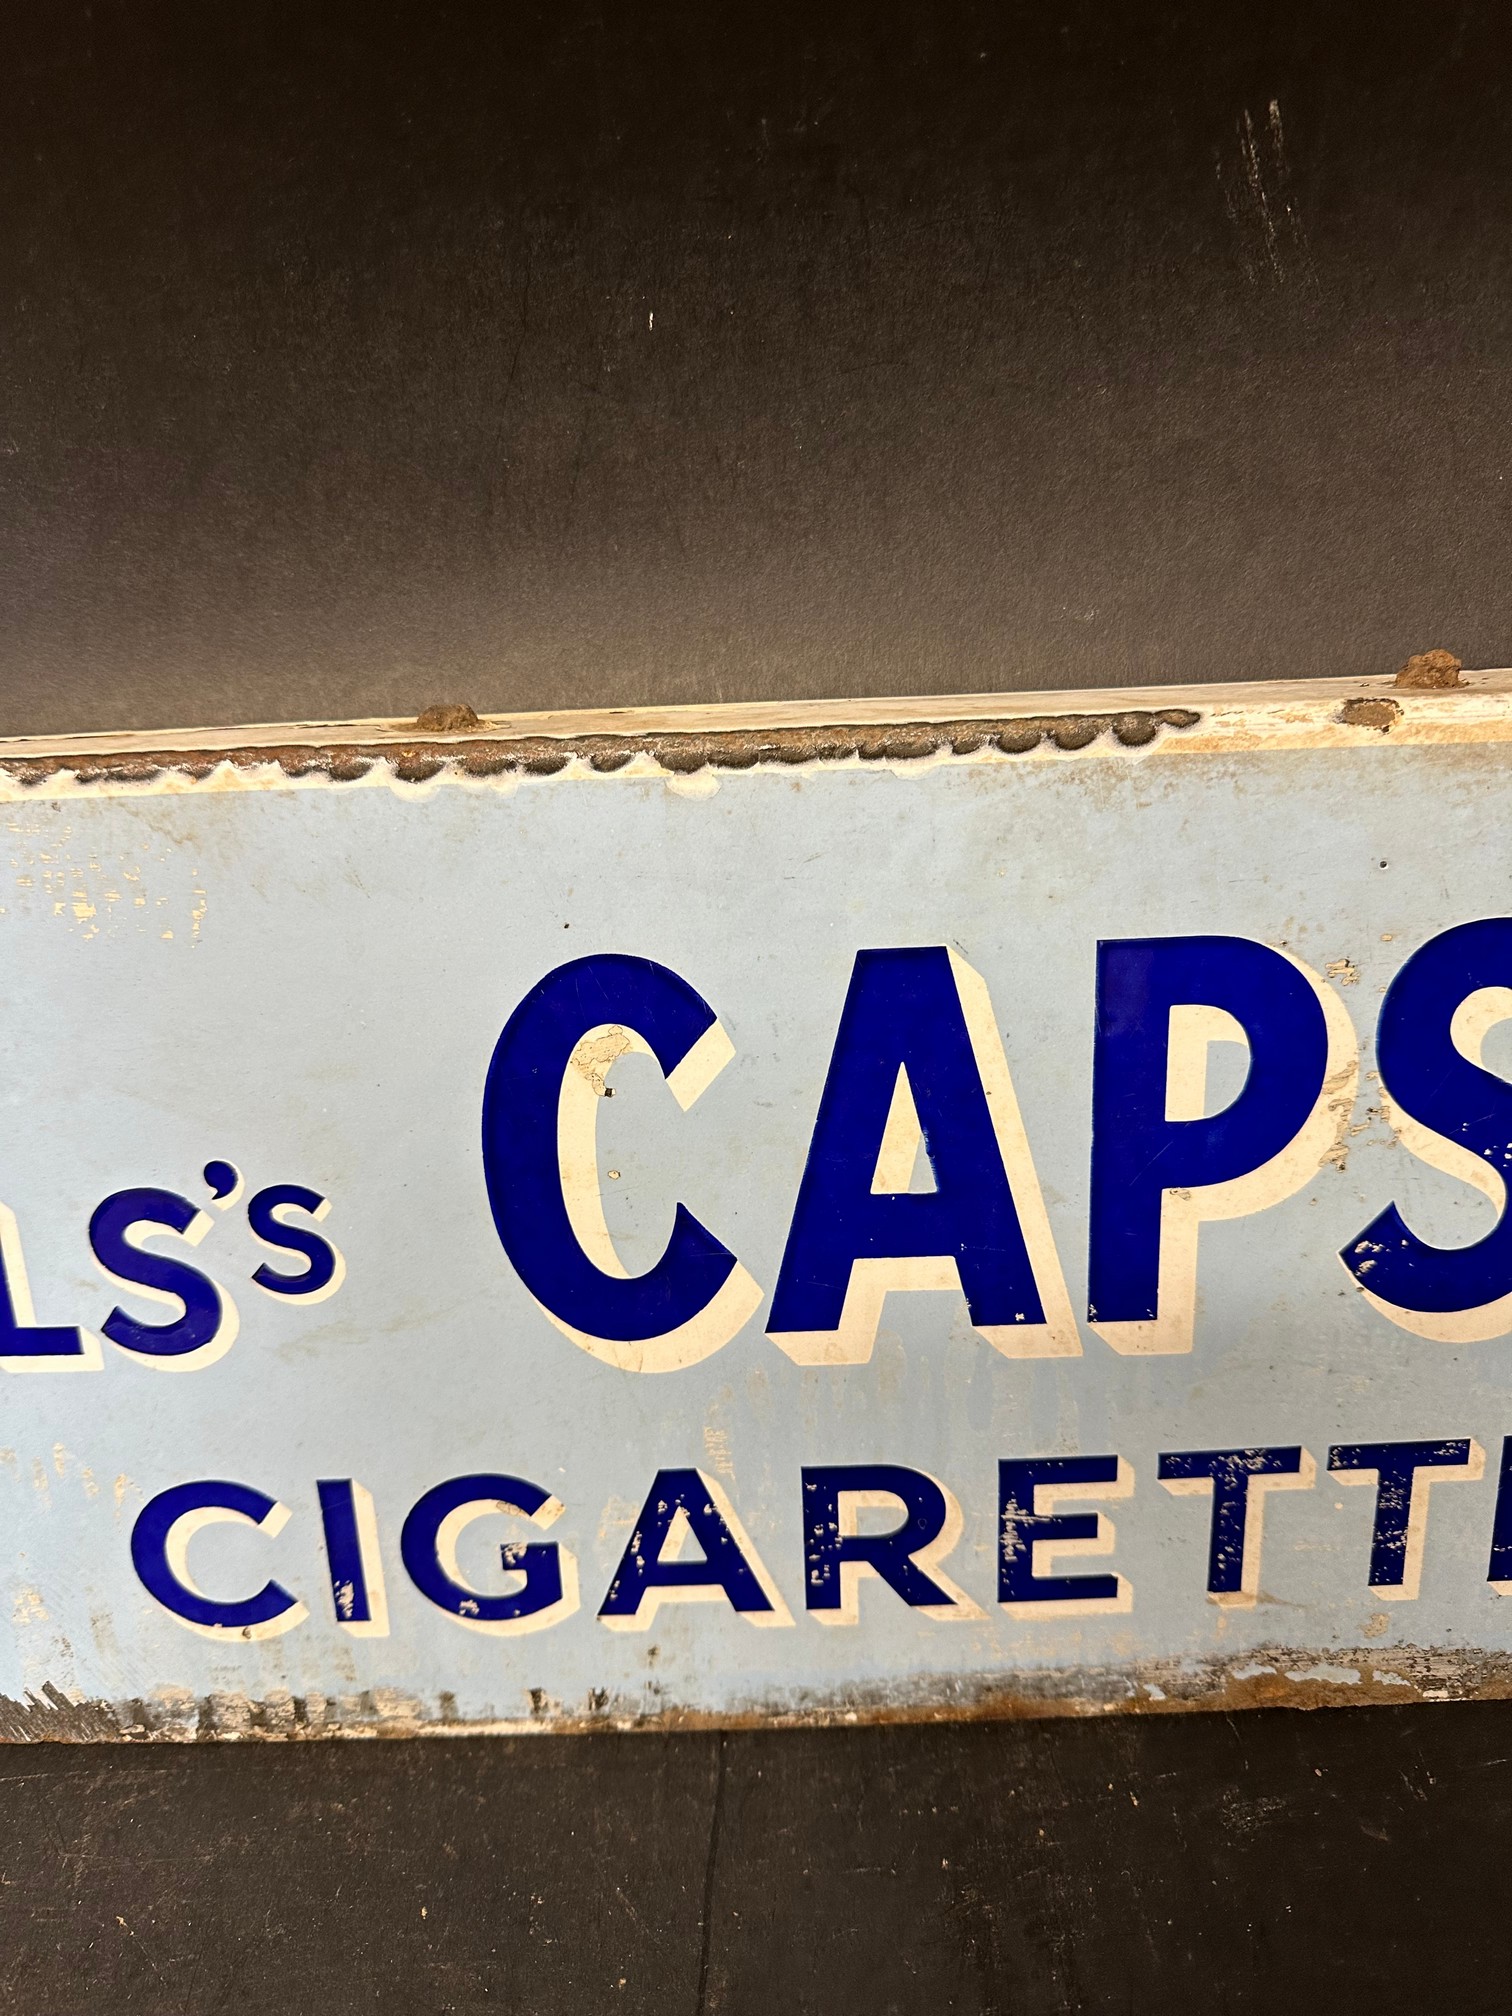 A Wills's Capstan Cigarettes double sided enamel advertising sign, unusually with hanging flange - Image 3 of 5